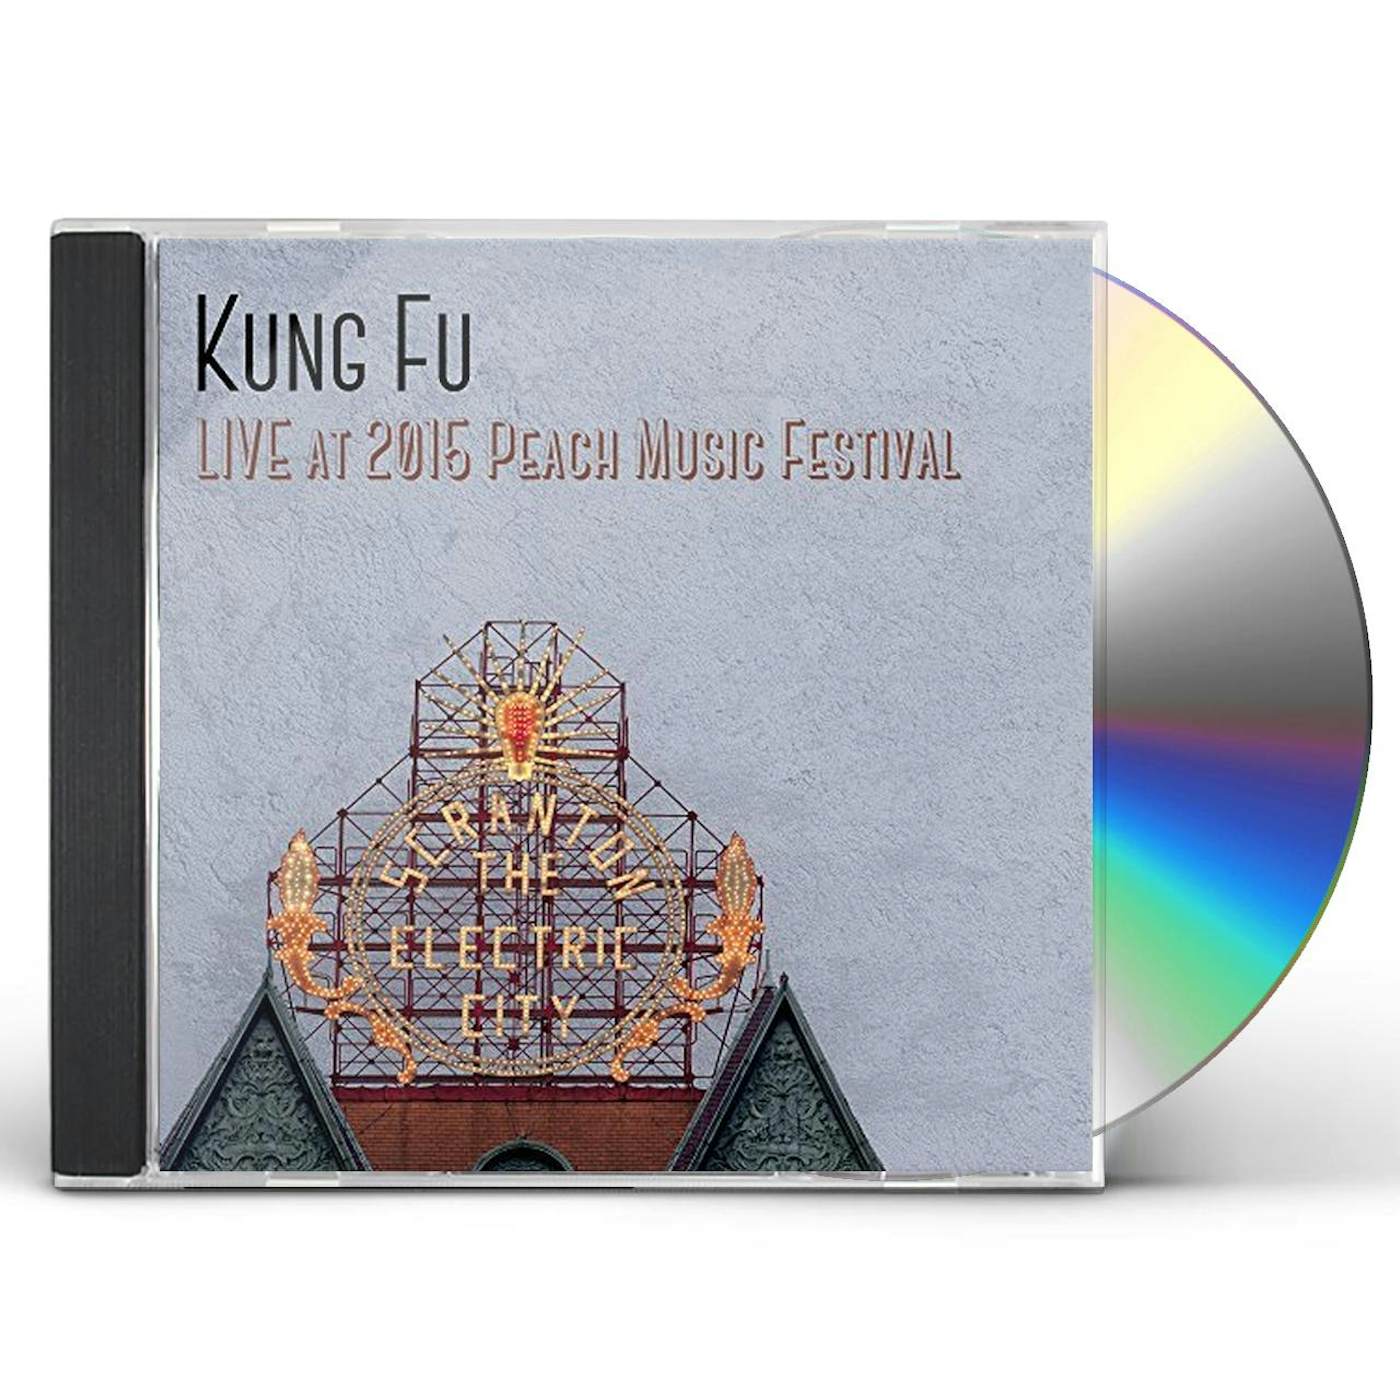 Kung Fu LIVE AT THE 2015 PEACH MUSIC FESTIVAL CD